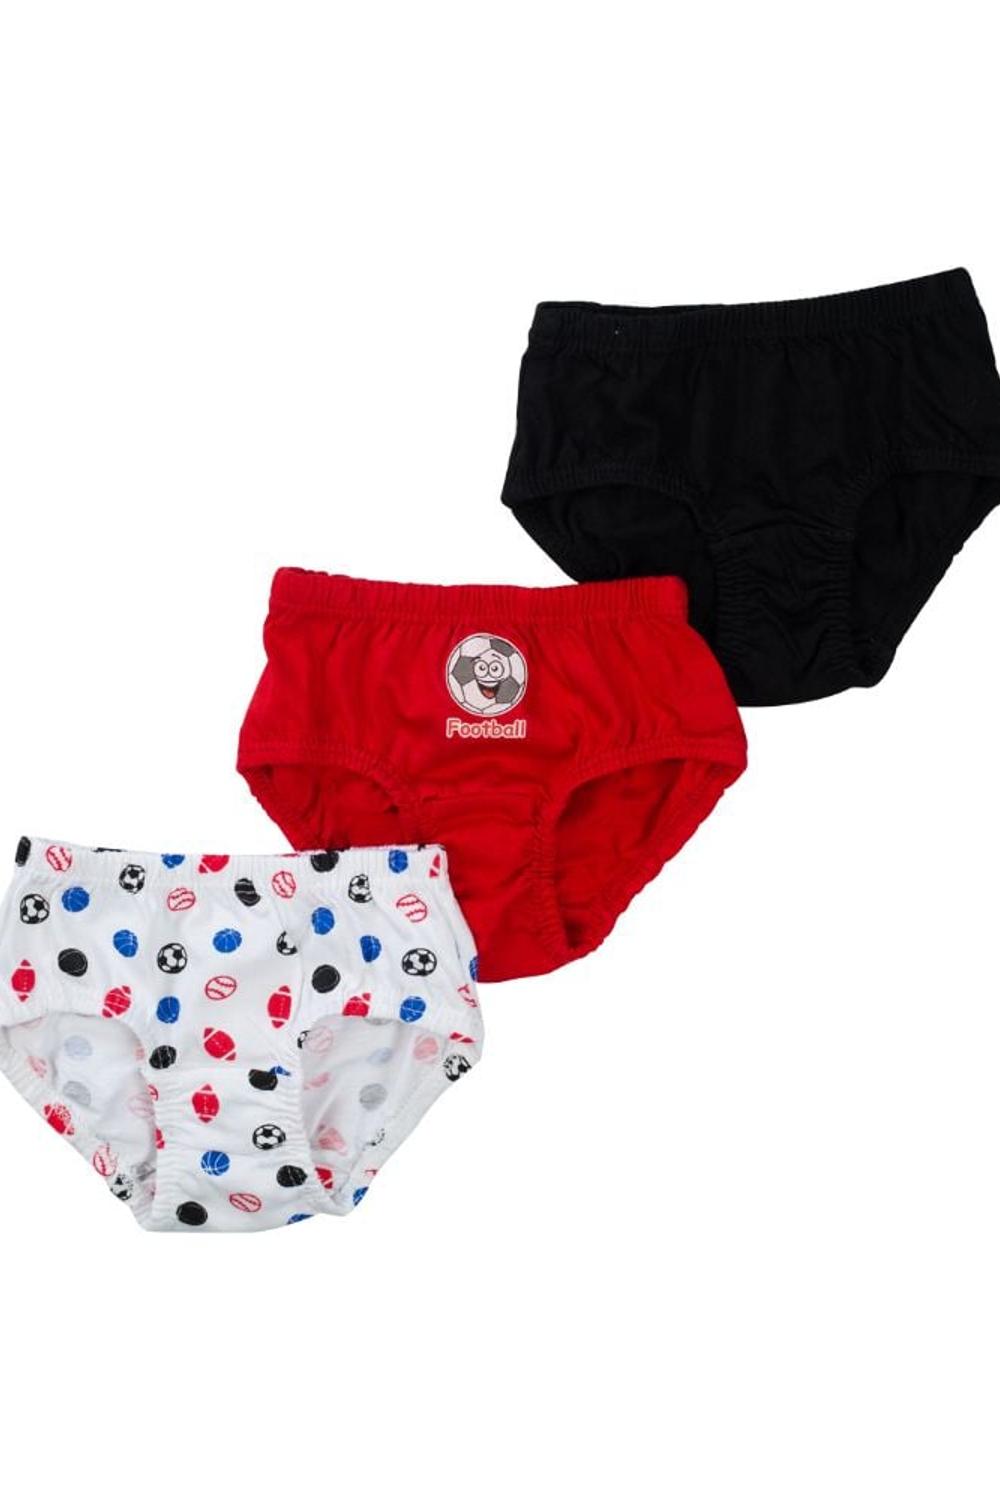 Mee Mee Boys Briefs Pack Of 3 - White &Amp Black & Amp Red